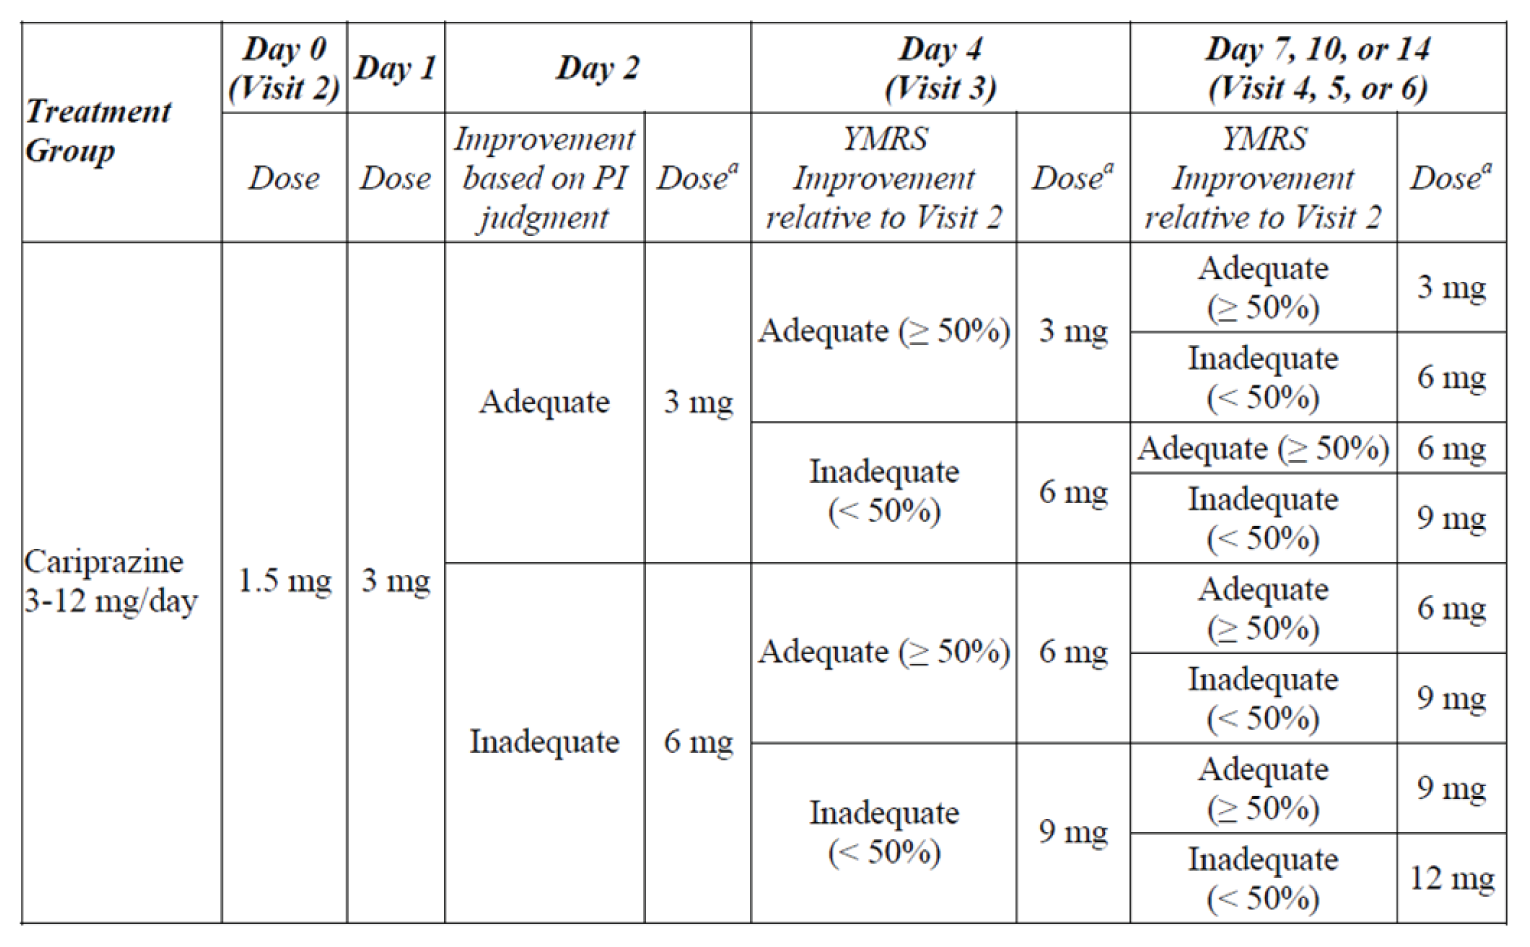 This is a table summarizing the dosing titration schedule for cariprazine 3 mg per day to 12 mg per day. The titration schedule starts with 1.5 mg per day at day 0 and is titrated up to 12 mg per day based on treatment response.